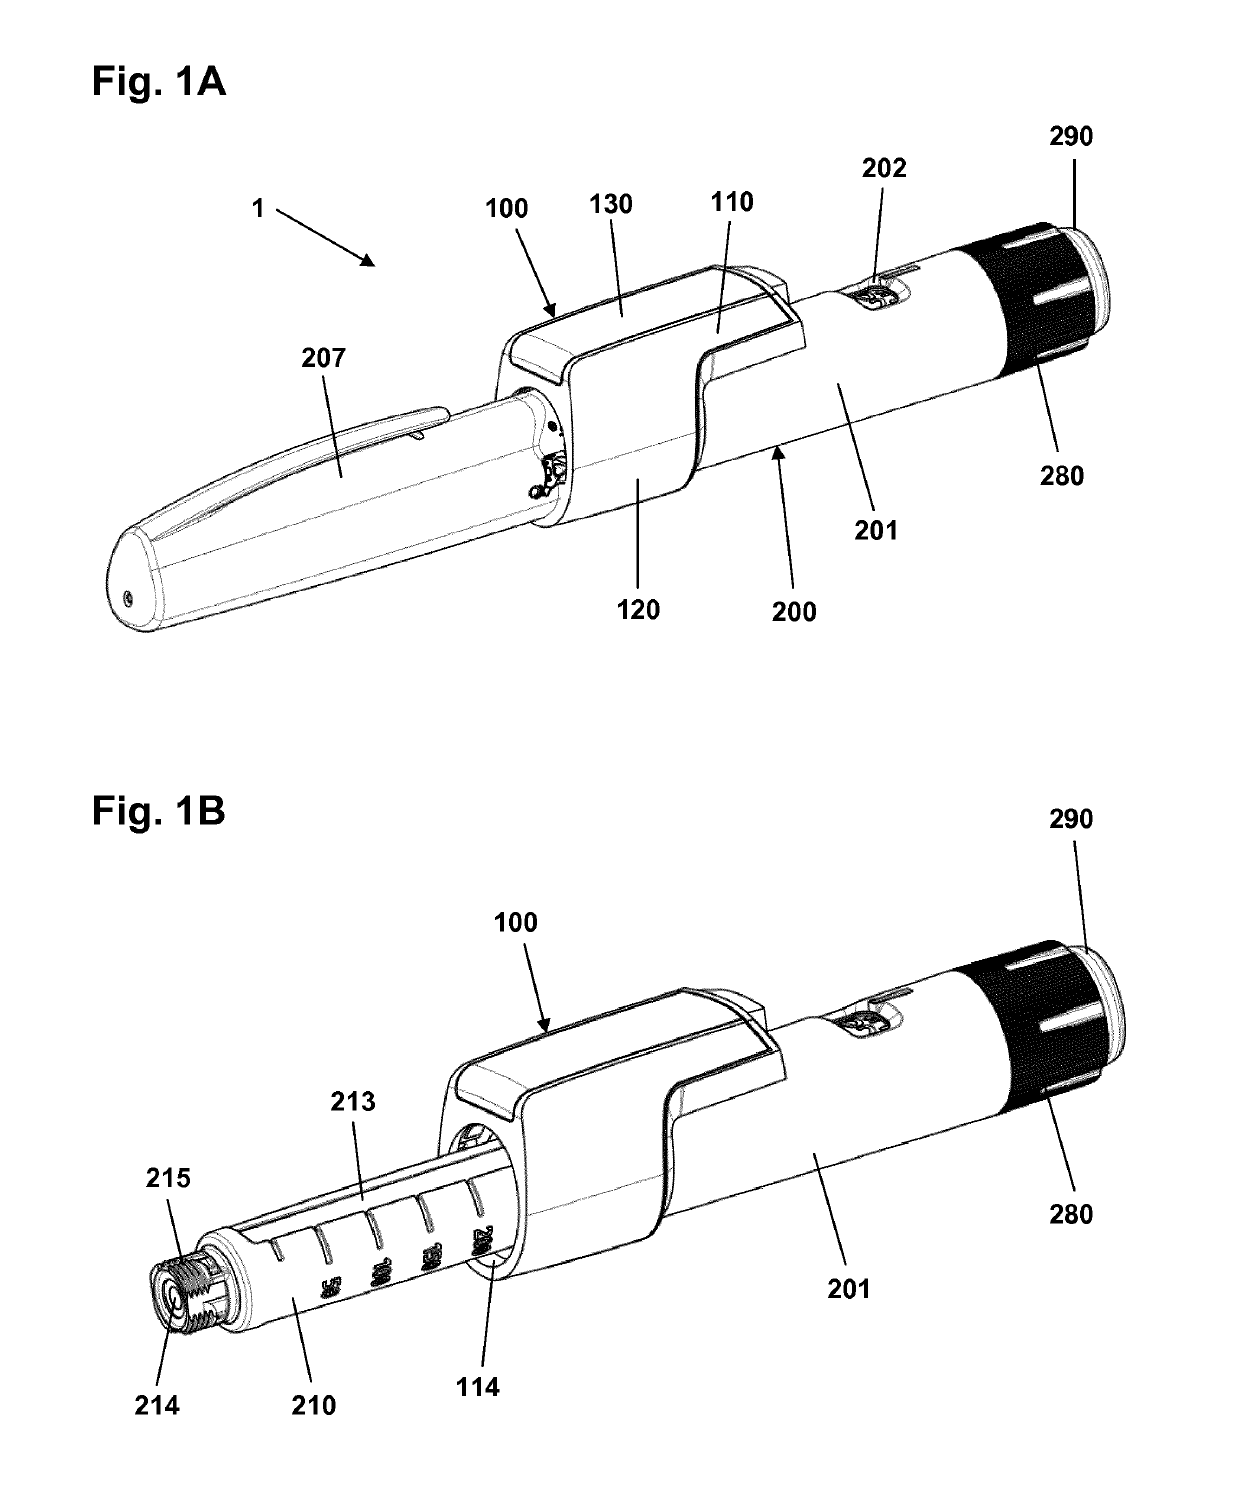 Pen-type drug injector and add-on module with magnetic dosage sensor system and error detection